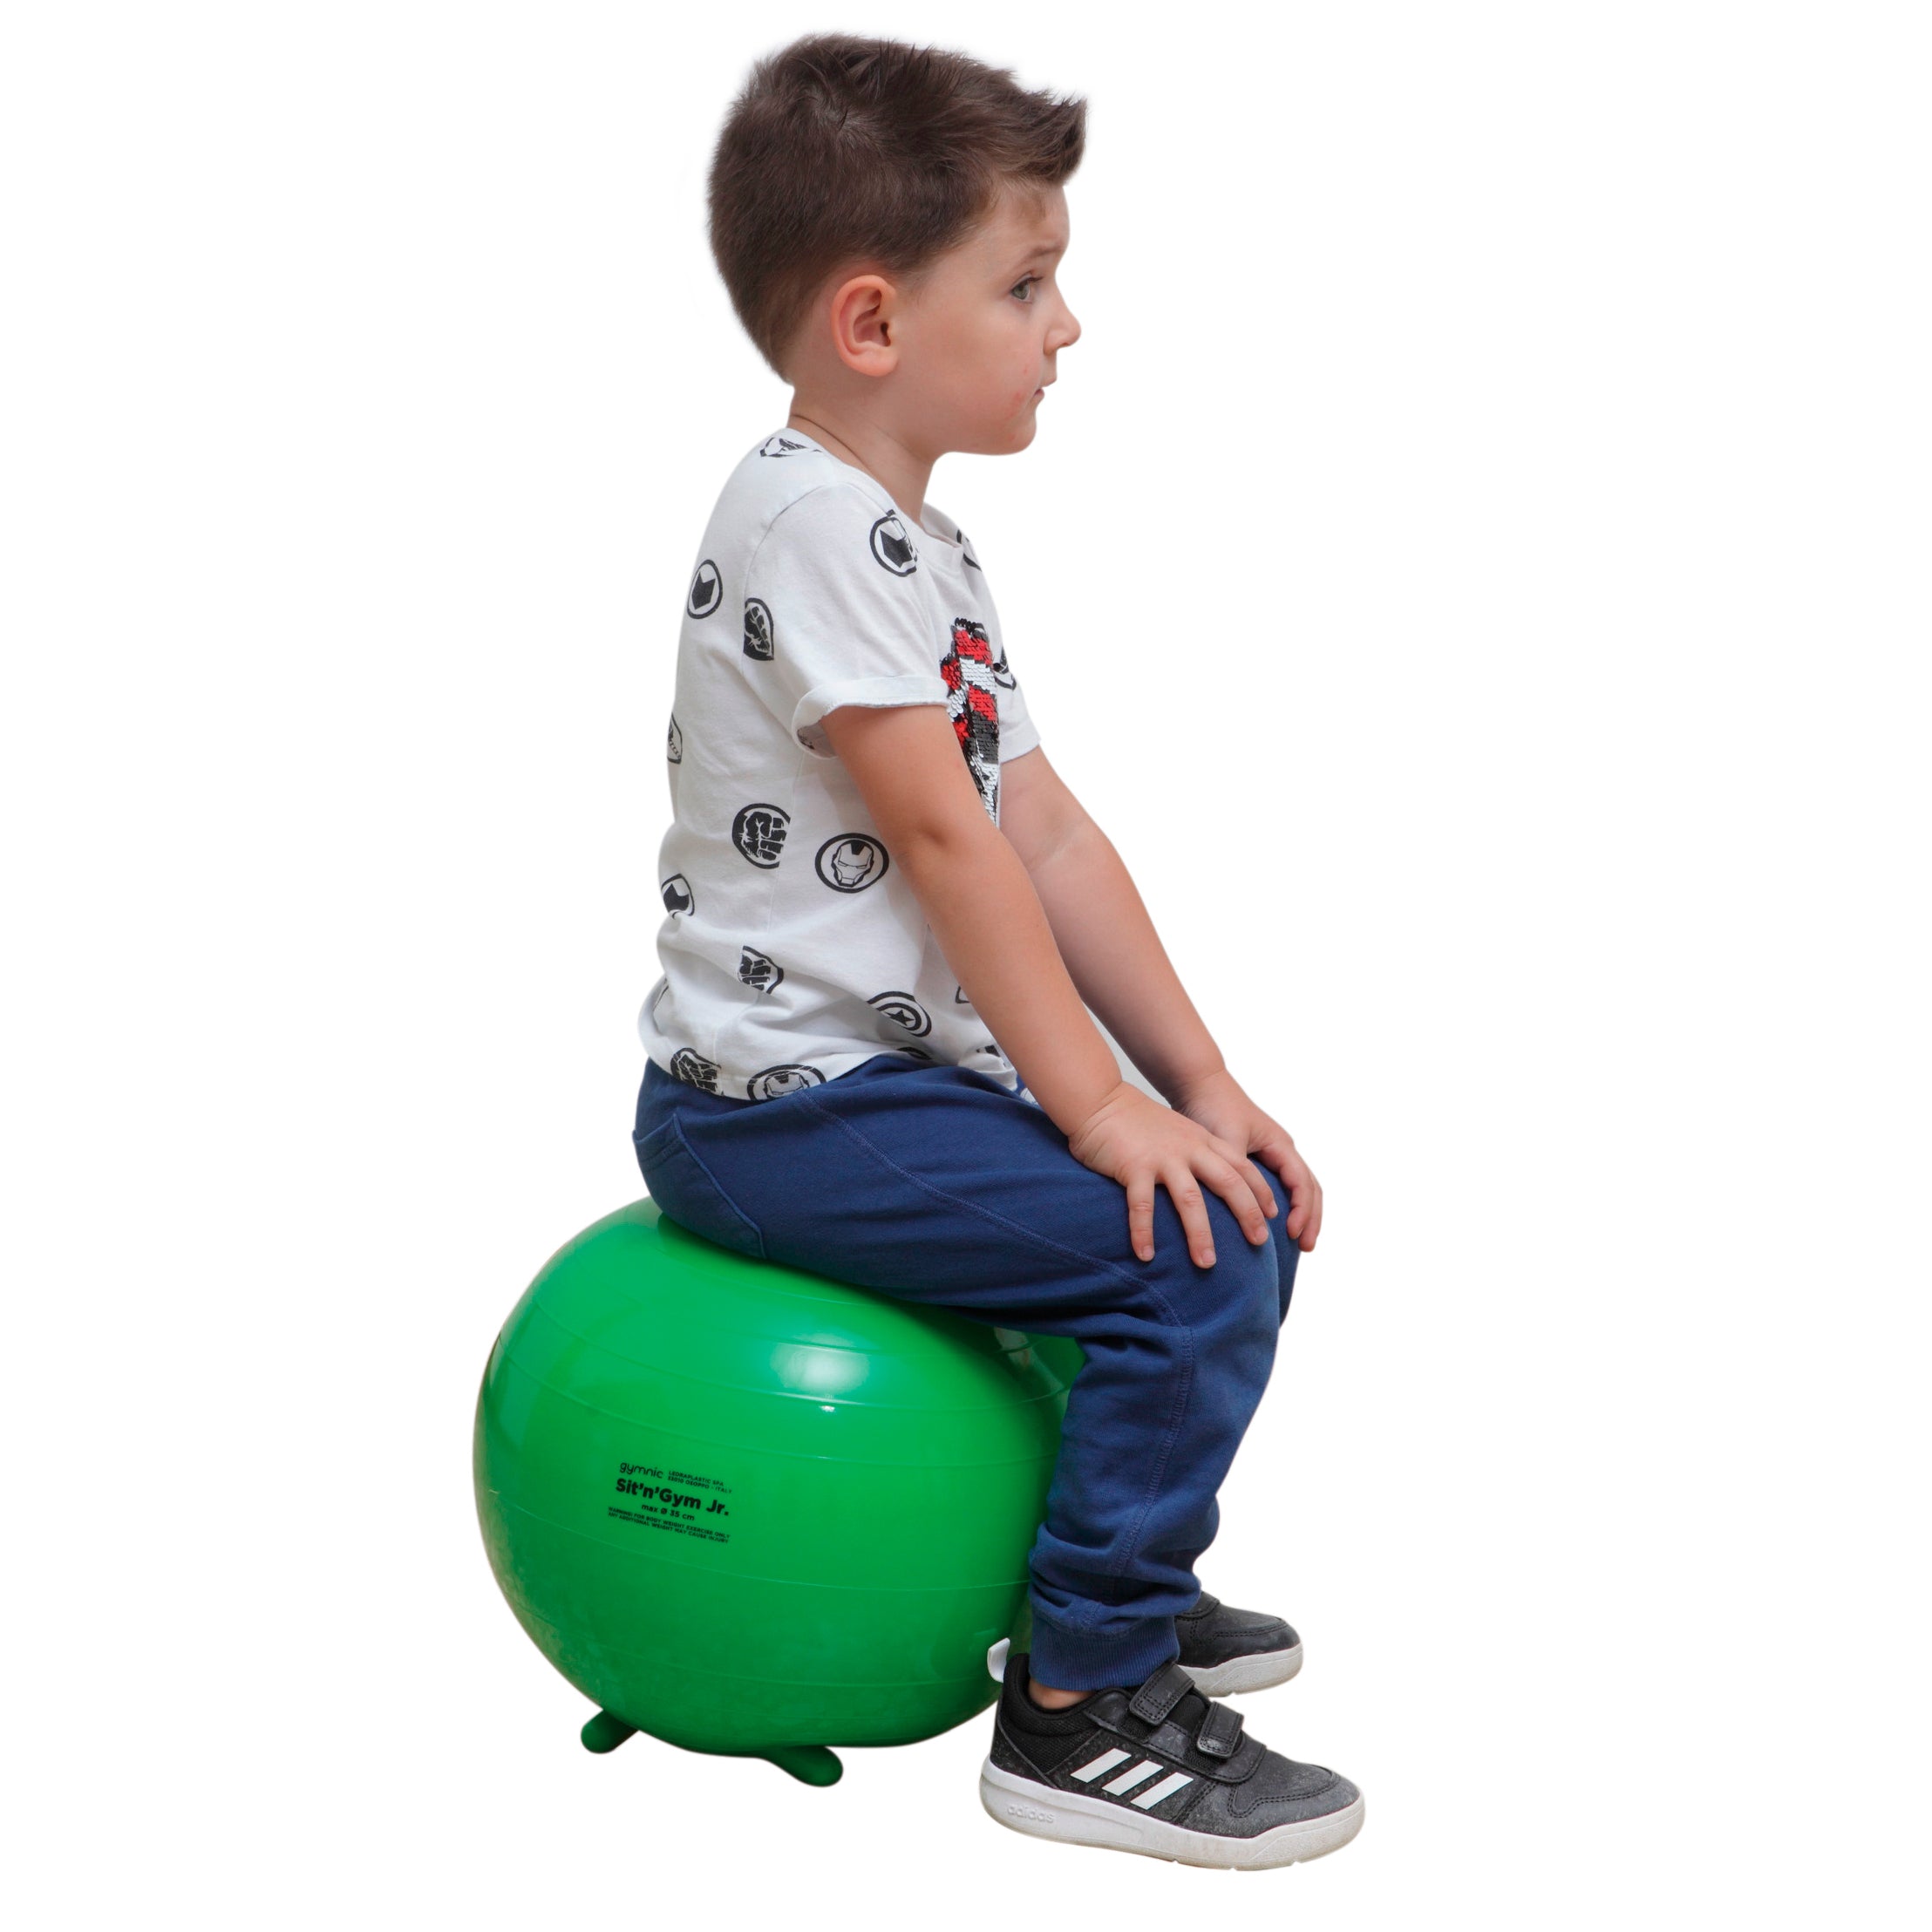 The Sit’n’Gym Jr. ball is designed for children and is widely used in primary schools. It provides the beneficial effects of a correct posture through dynamic sitting and increases the child’s attention span and concentration. Its small feet prevent the ball from rolling away.